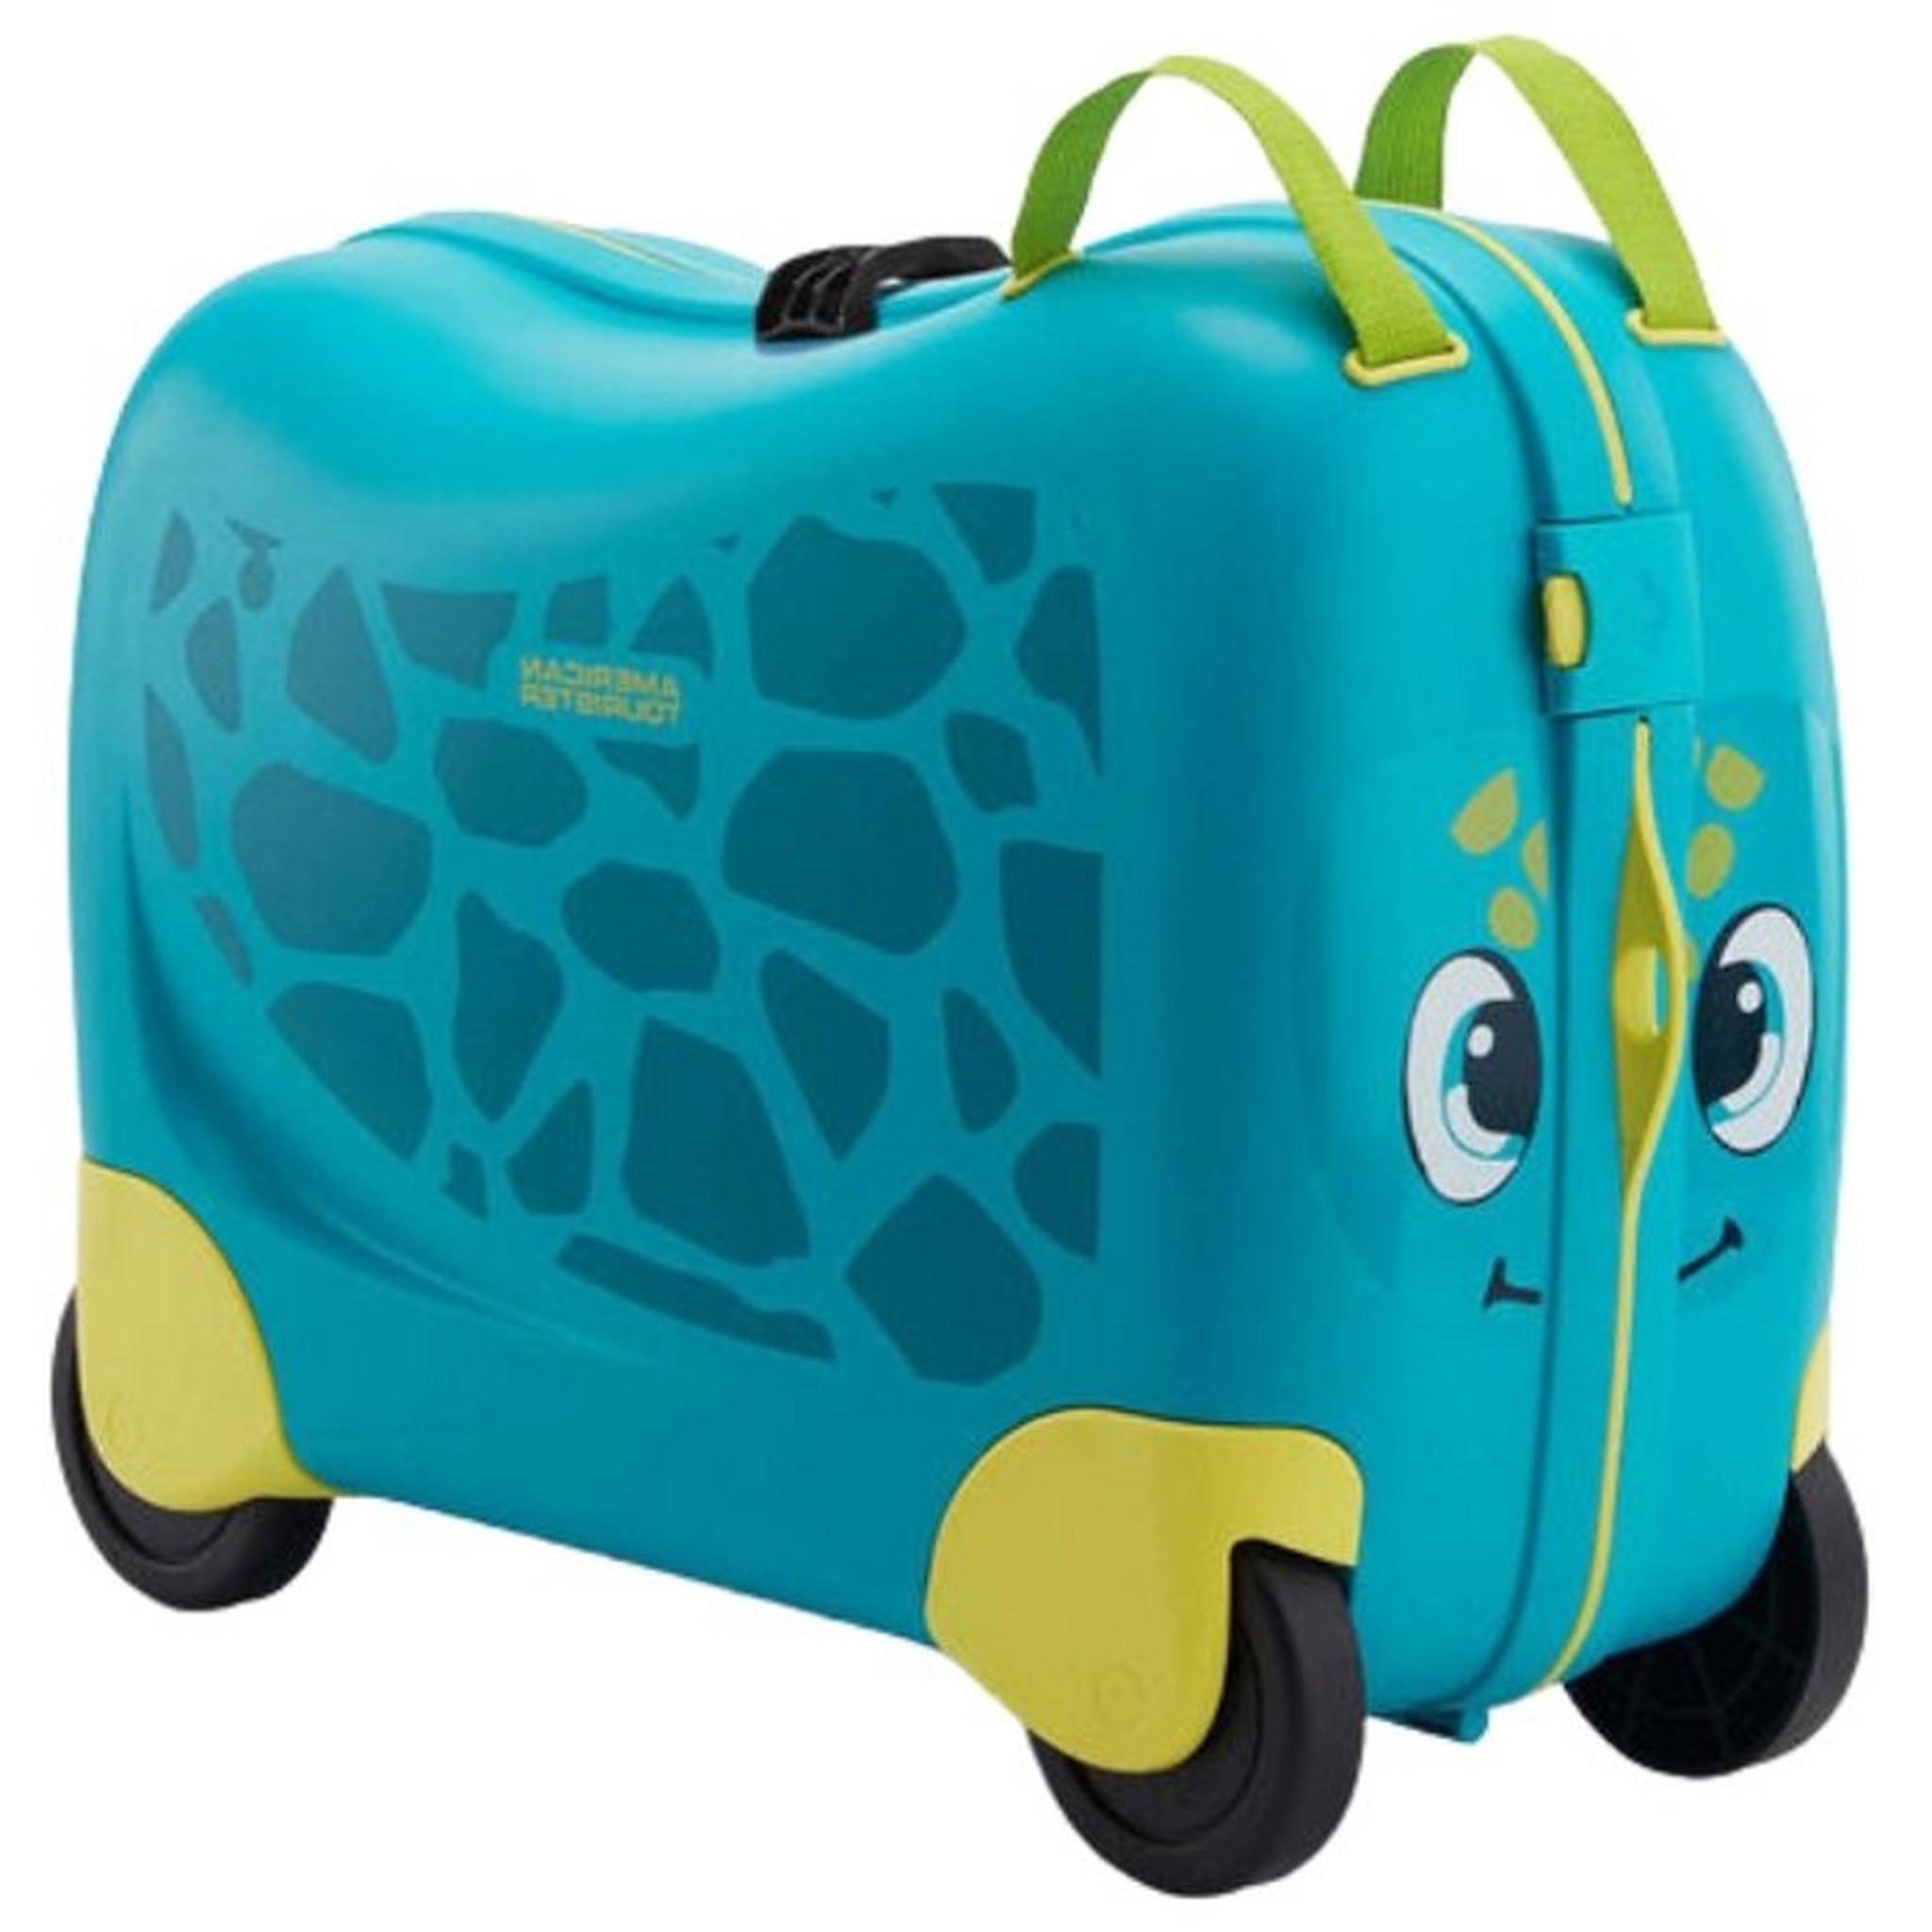 American Tourister Skittle Kids Trolley, 25 Liters, FH0X64411 – Turqouise Turtle Pattern